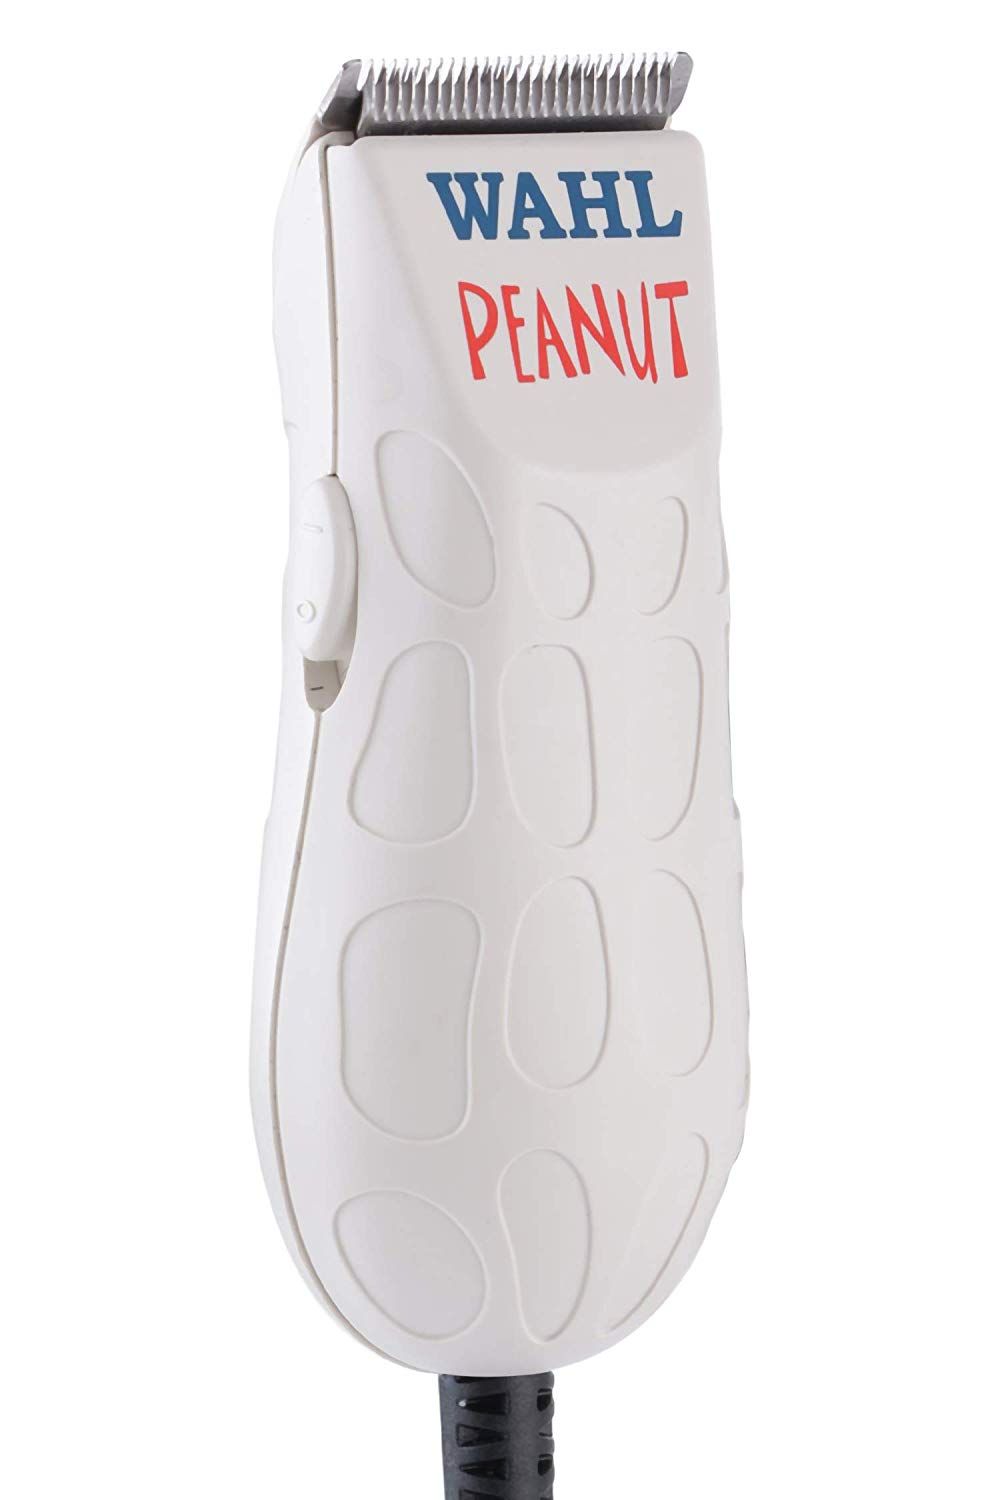 peanut clippers